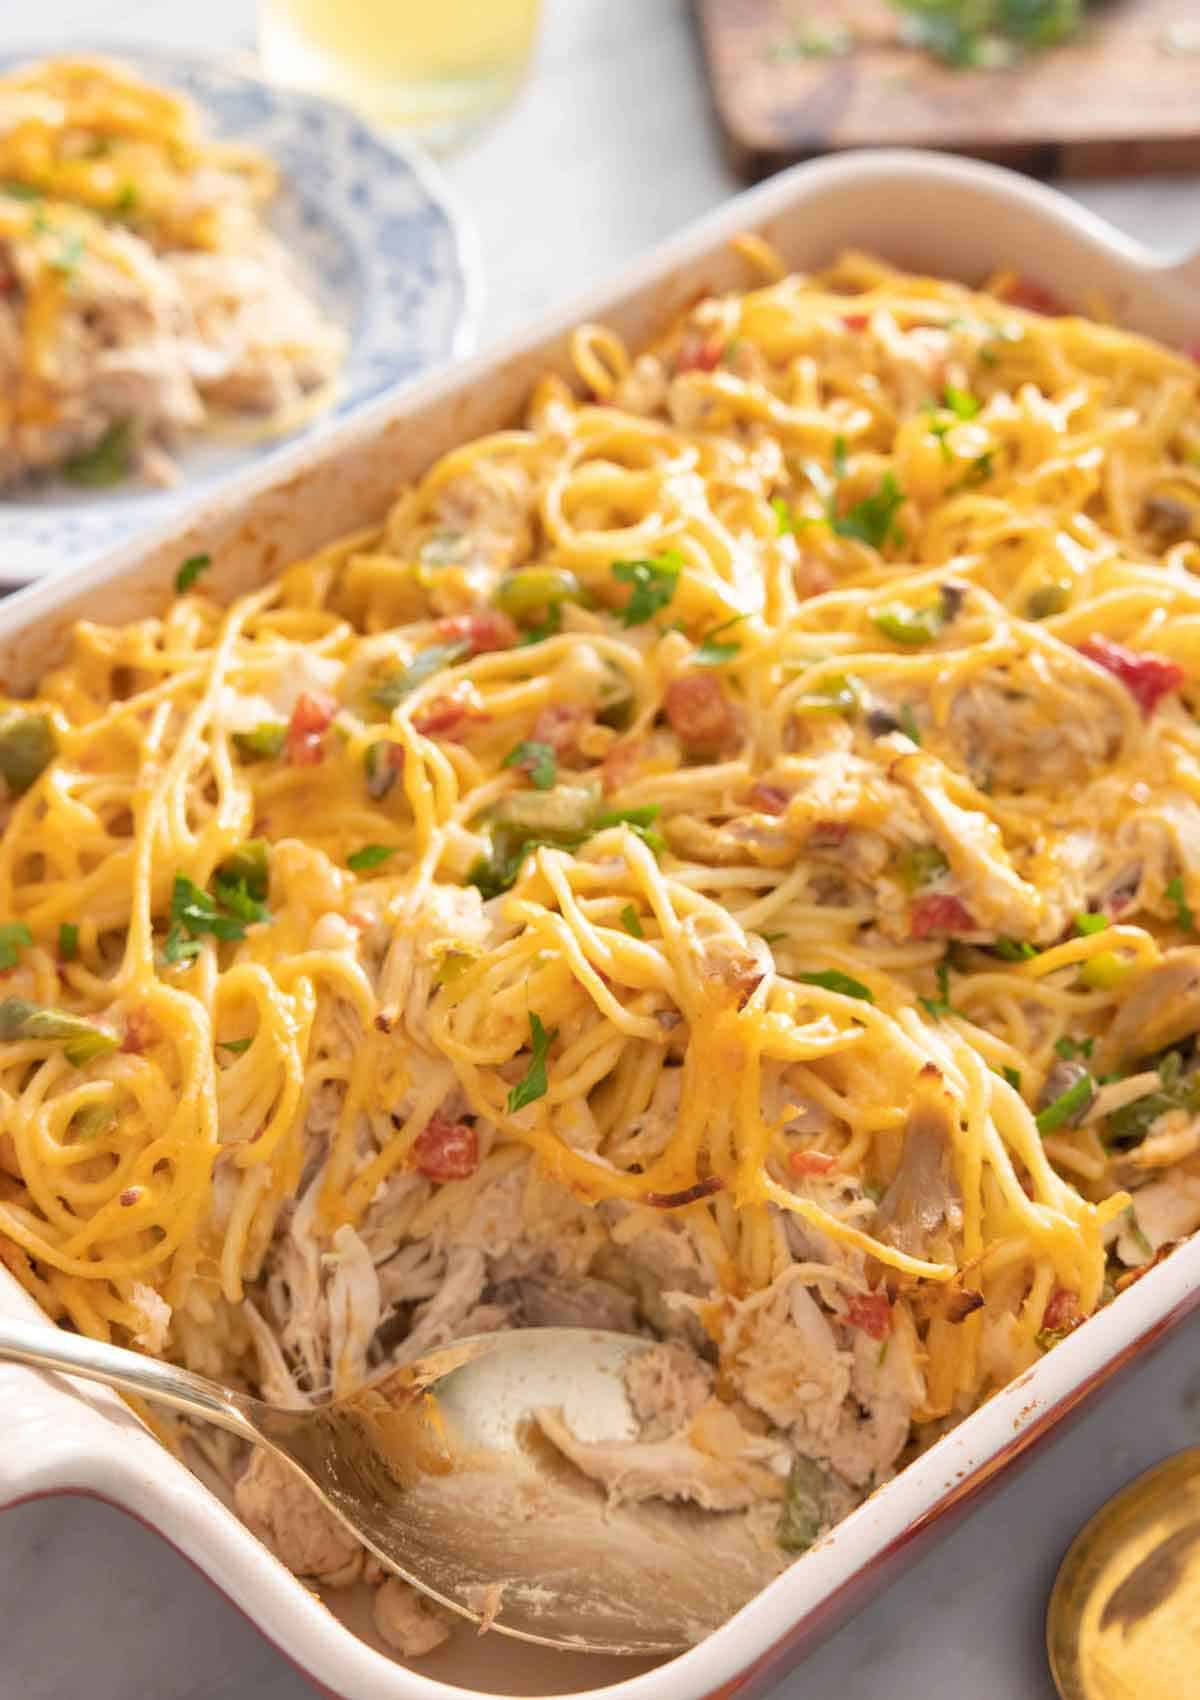 A casserole dish with chicken spaghetti and a spoon inside.